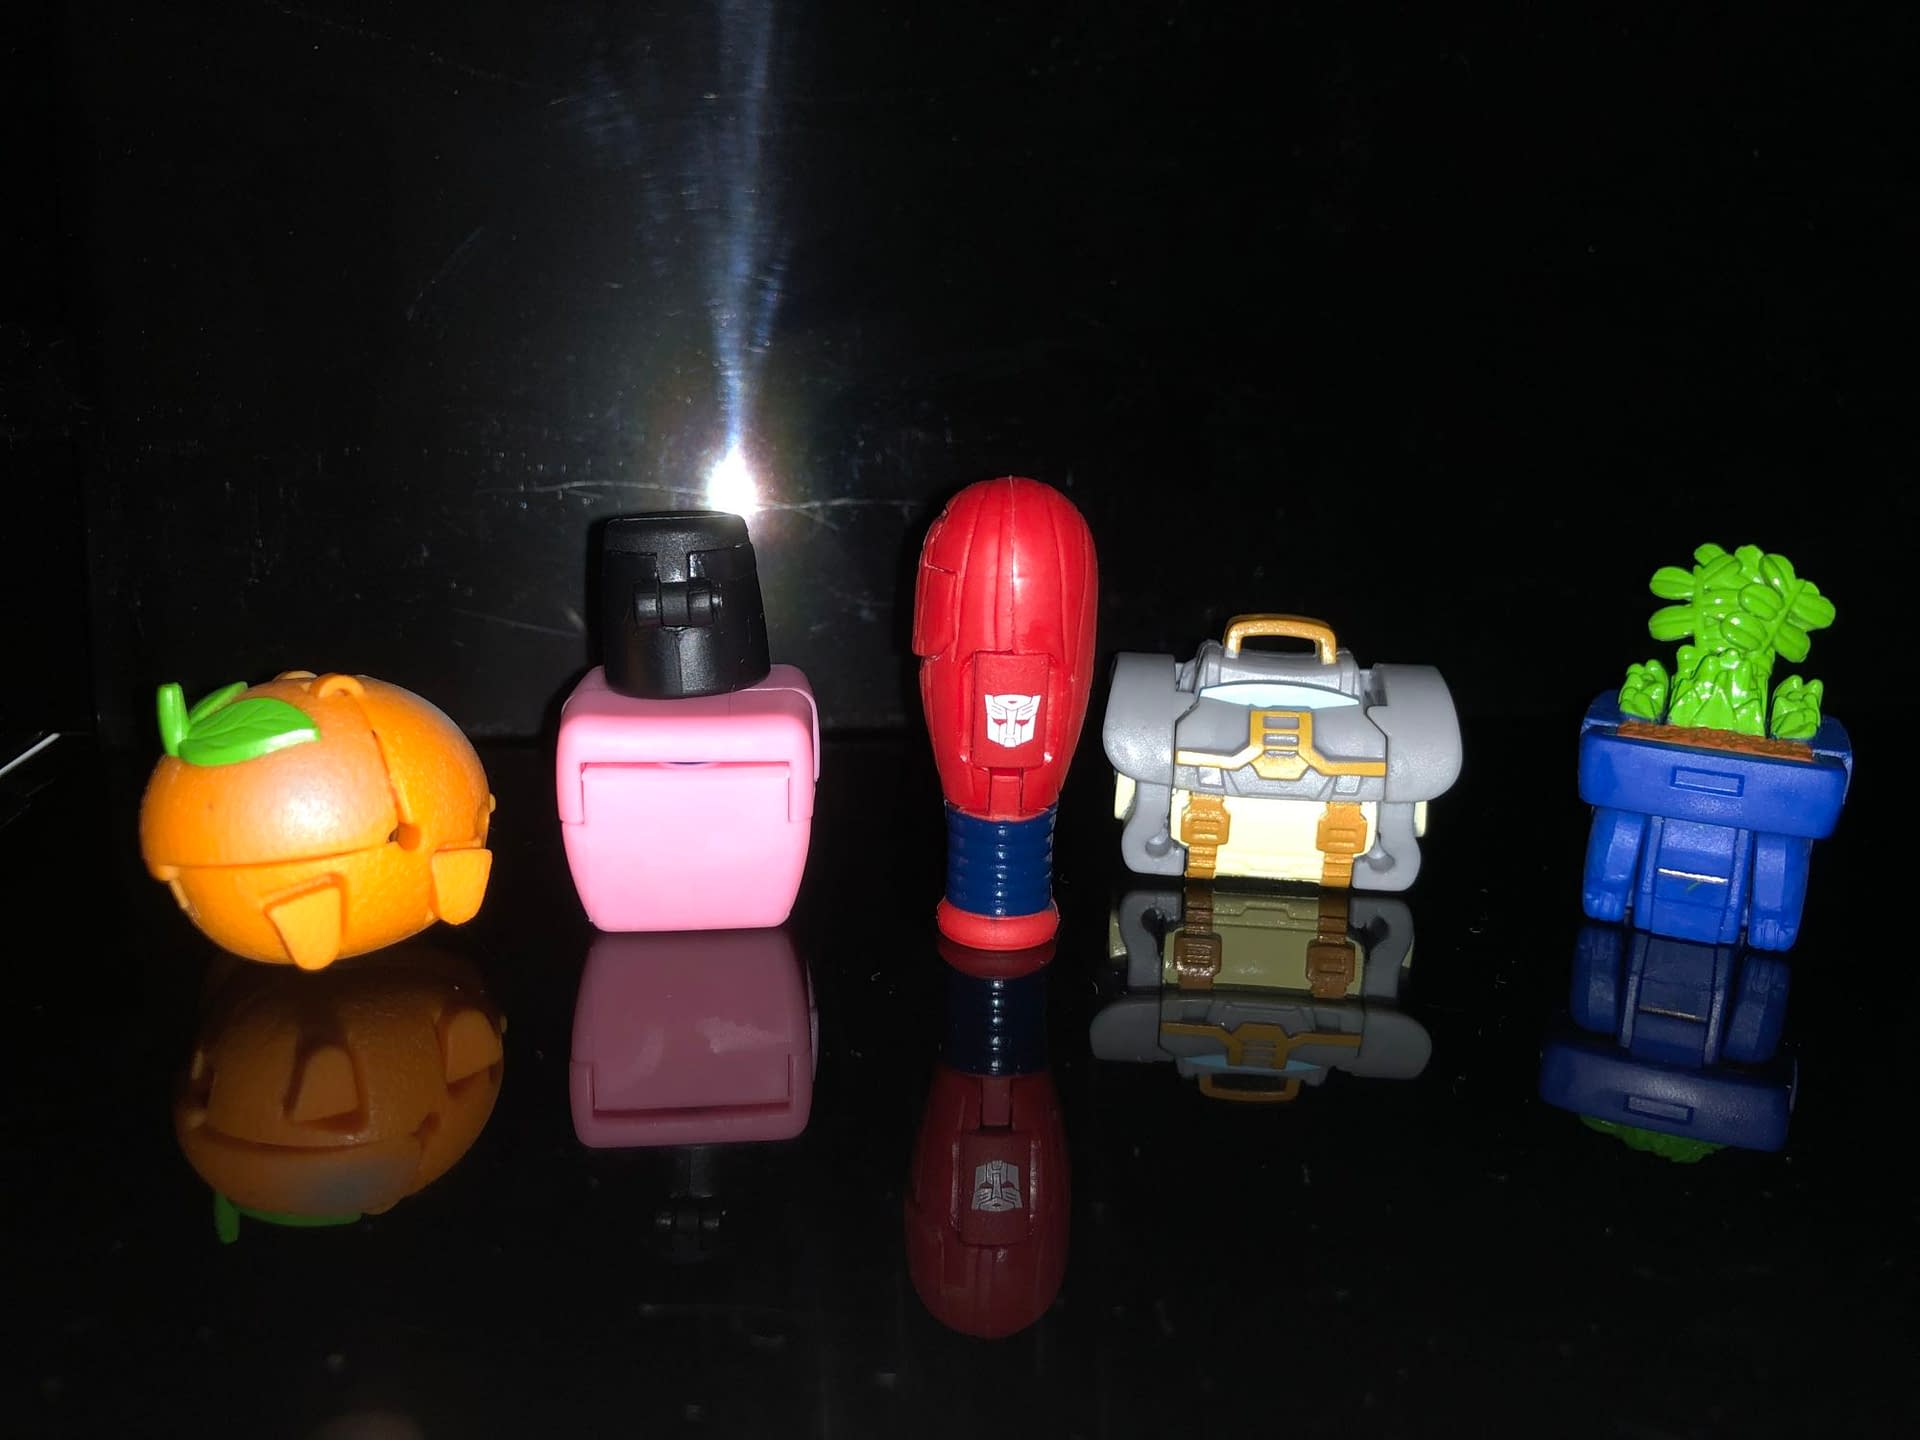 It's Transfomers BotBot Mania Thanks to Hasbro [Review]